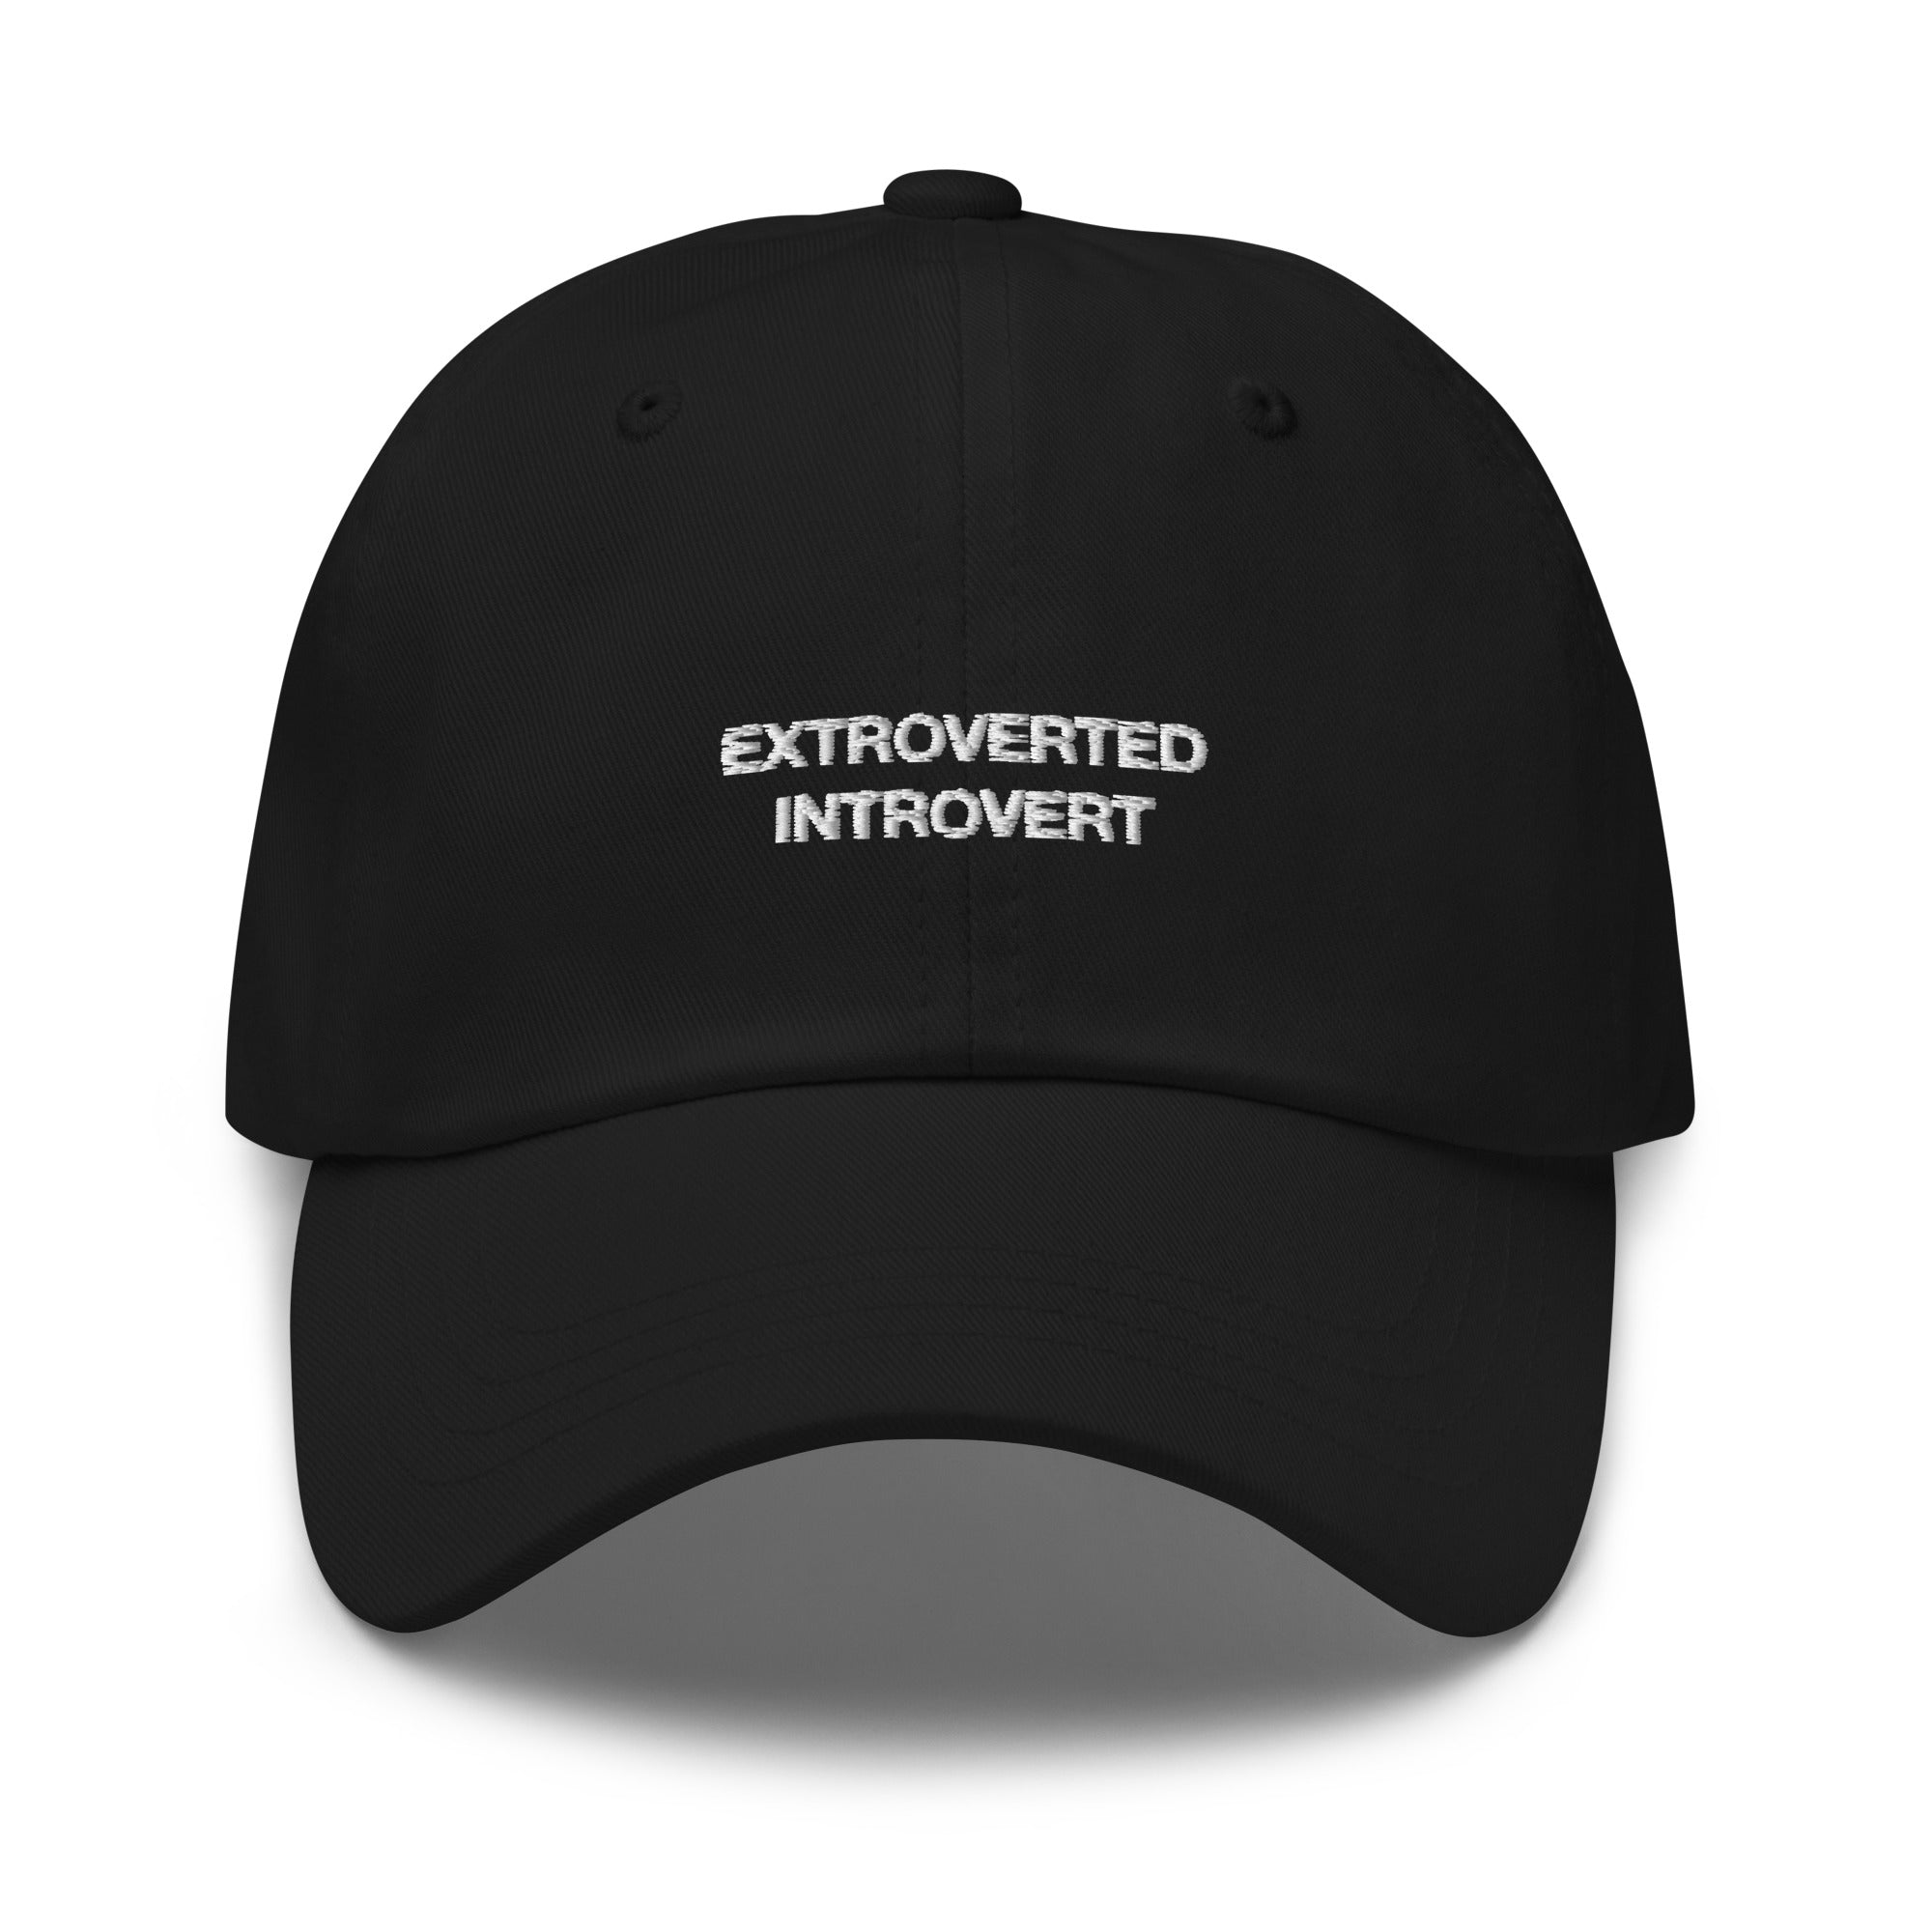 EXTROVERTED INTROVERT Cap